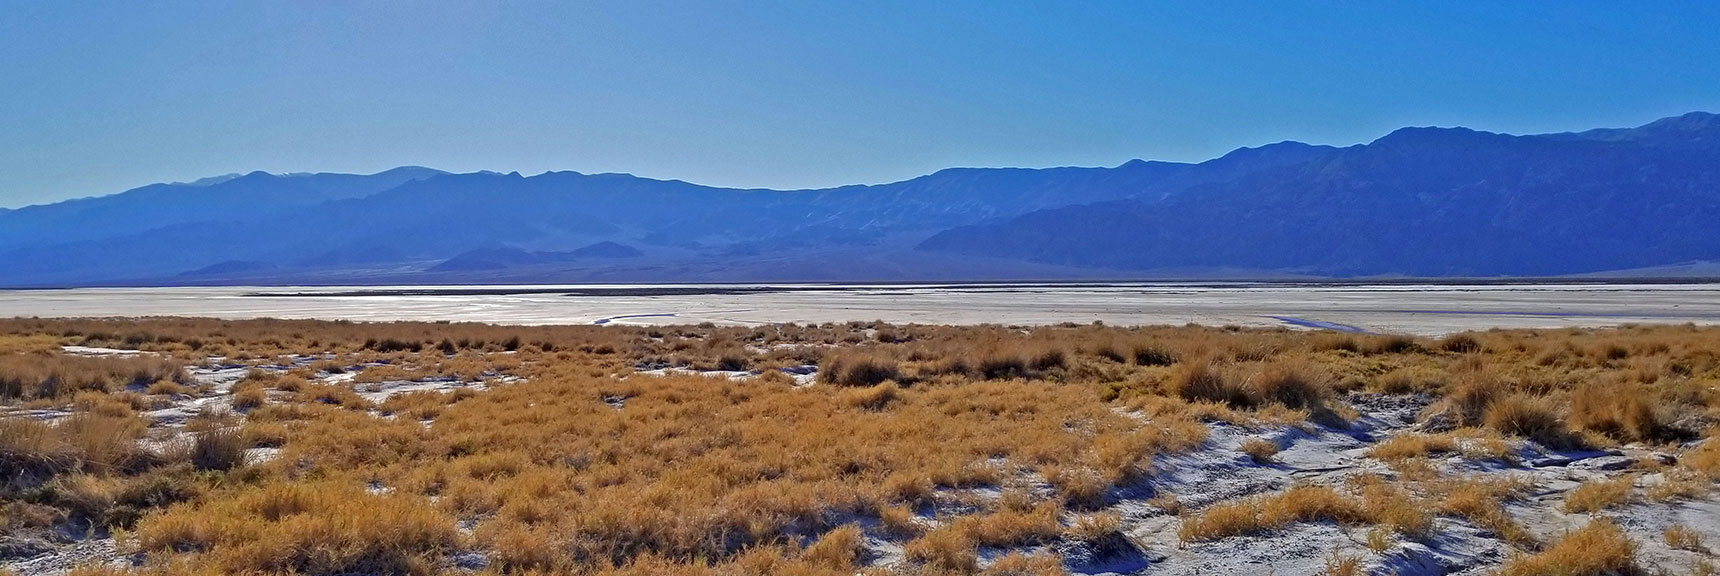 Salt Grass Zone at the Edge of Death Valley's Salt Flat | Return of Lake Manly (Lake in Death Valley) | Death Valley National Park, California